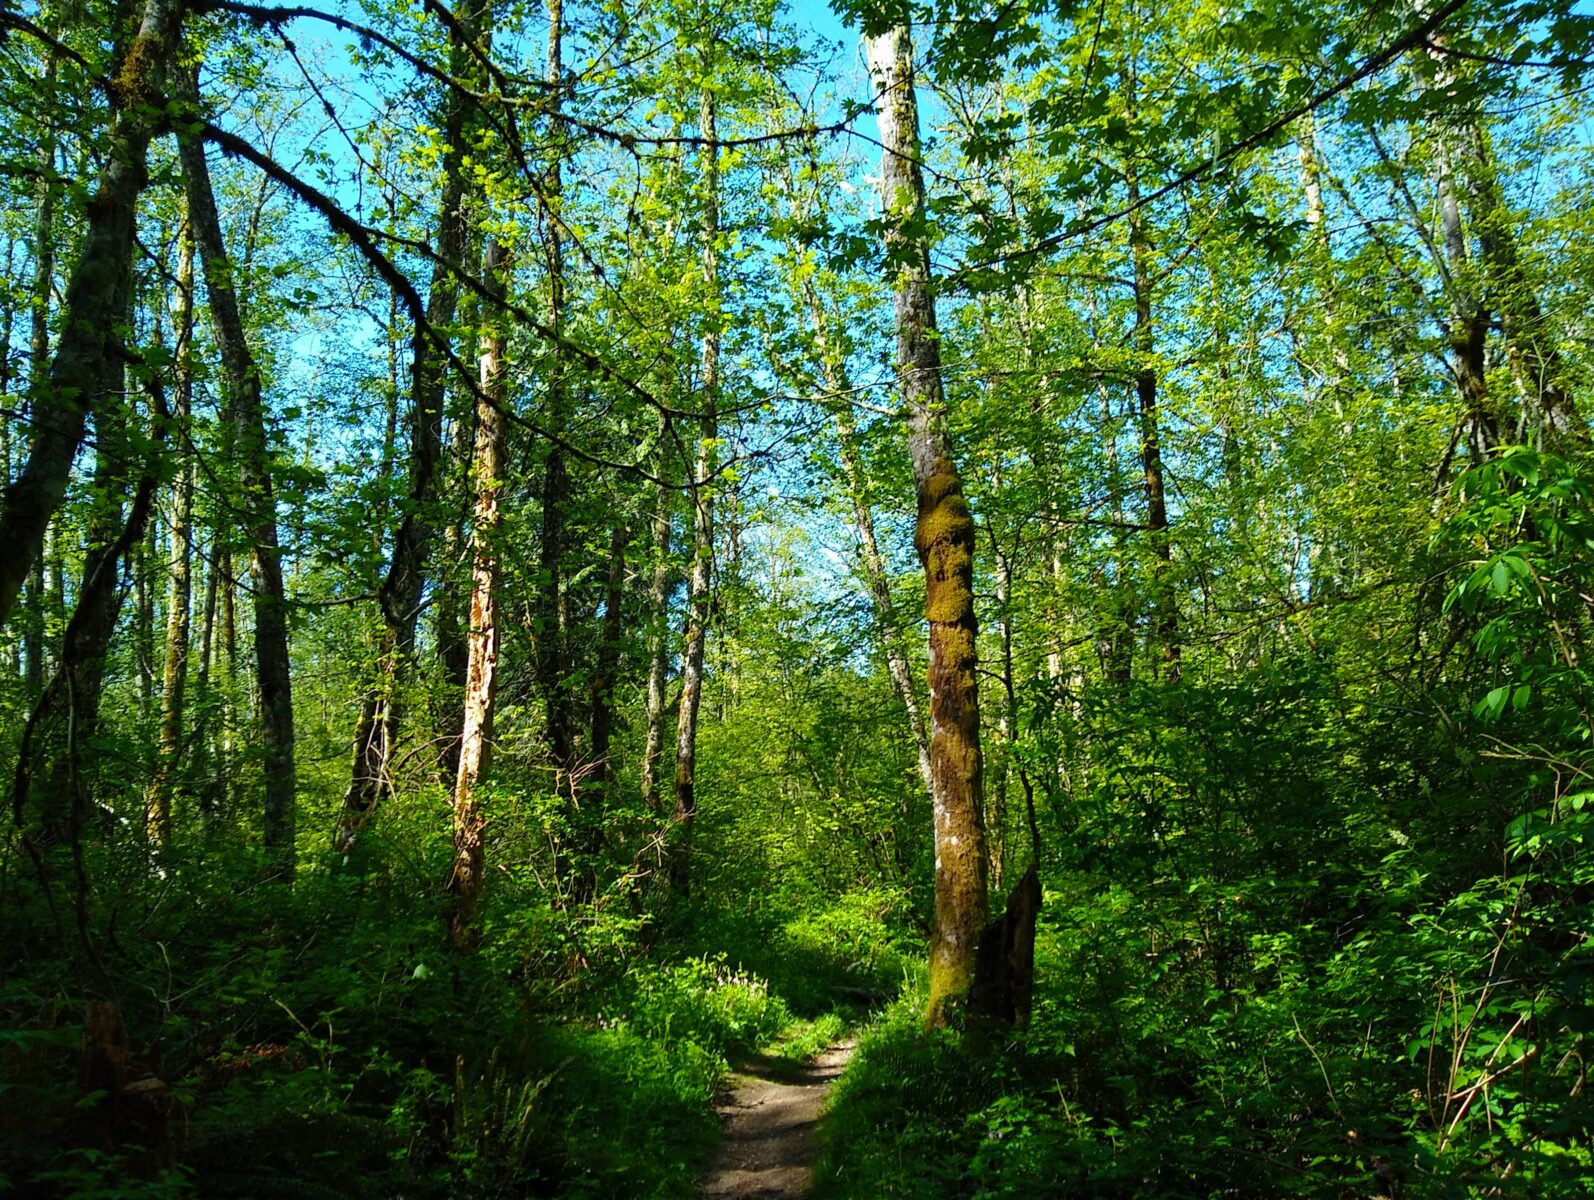 The Wilderness peak trail, an excellent november hike near Seattle and a good year round option, is heavily forested with green trees and green undergrowth